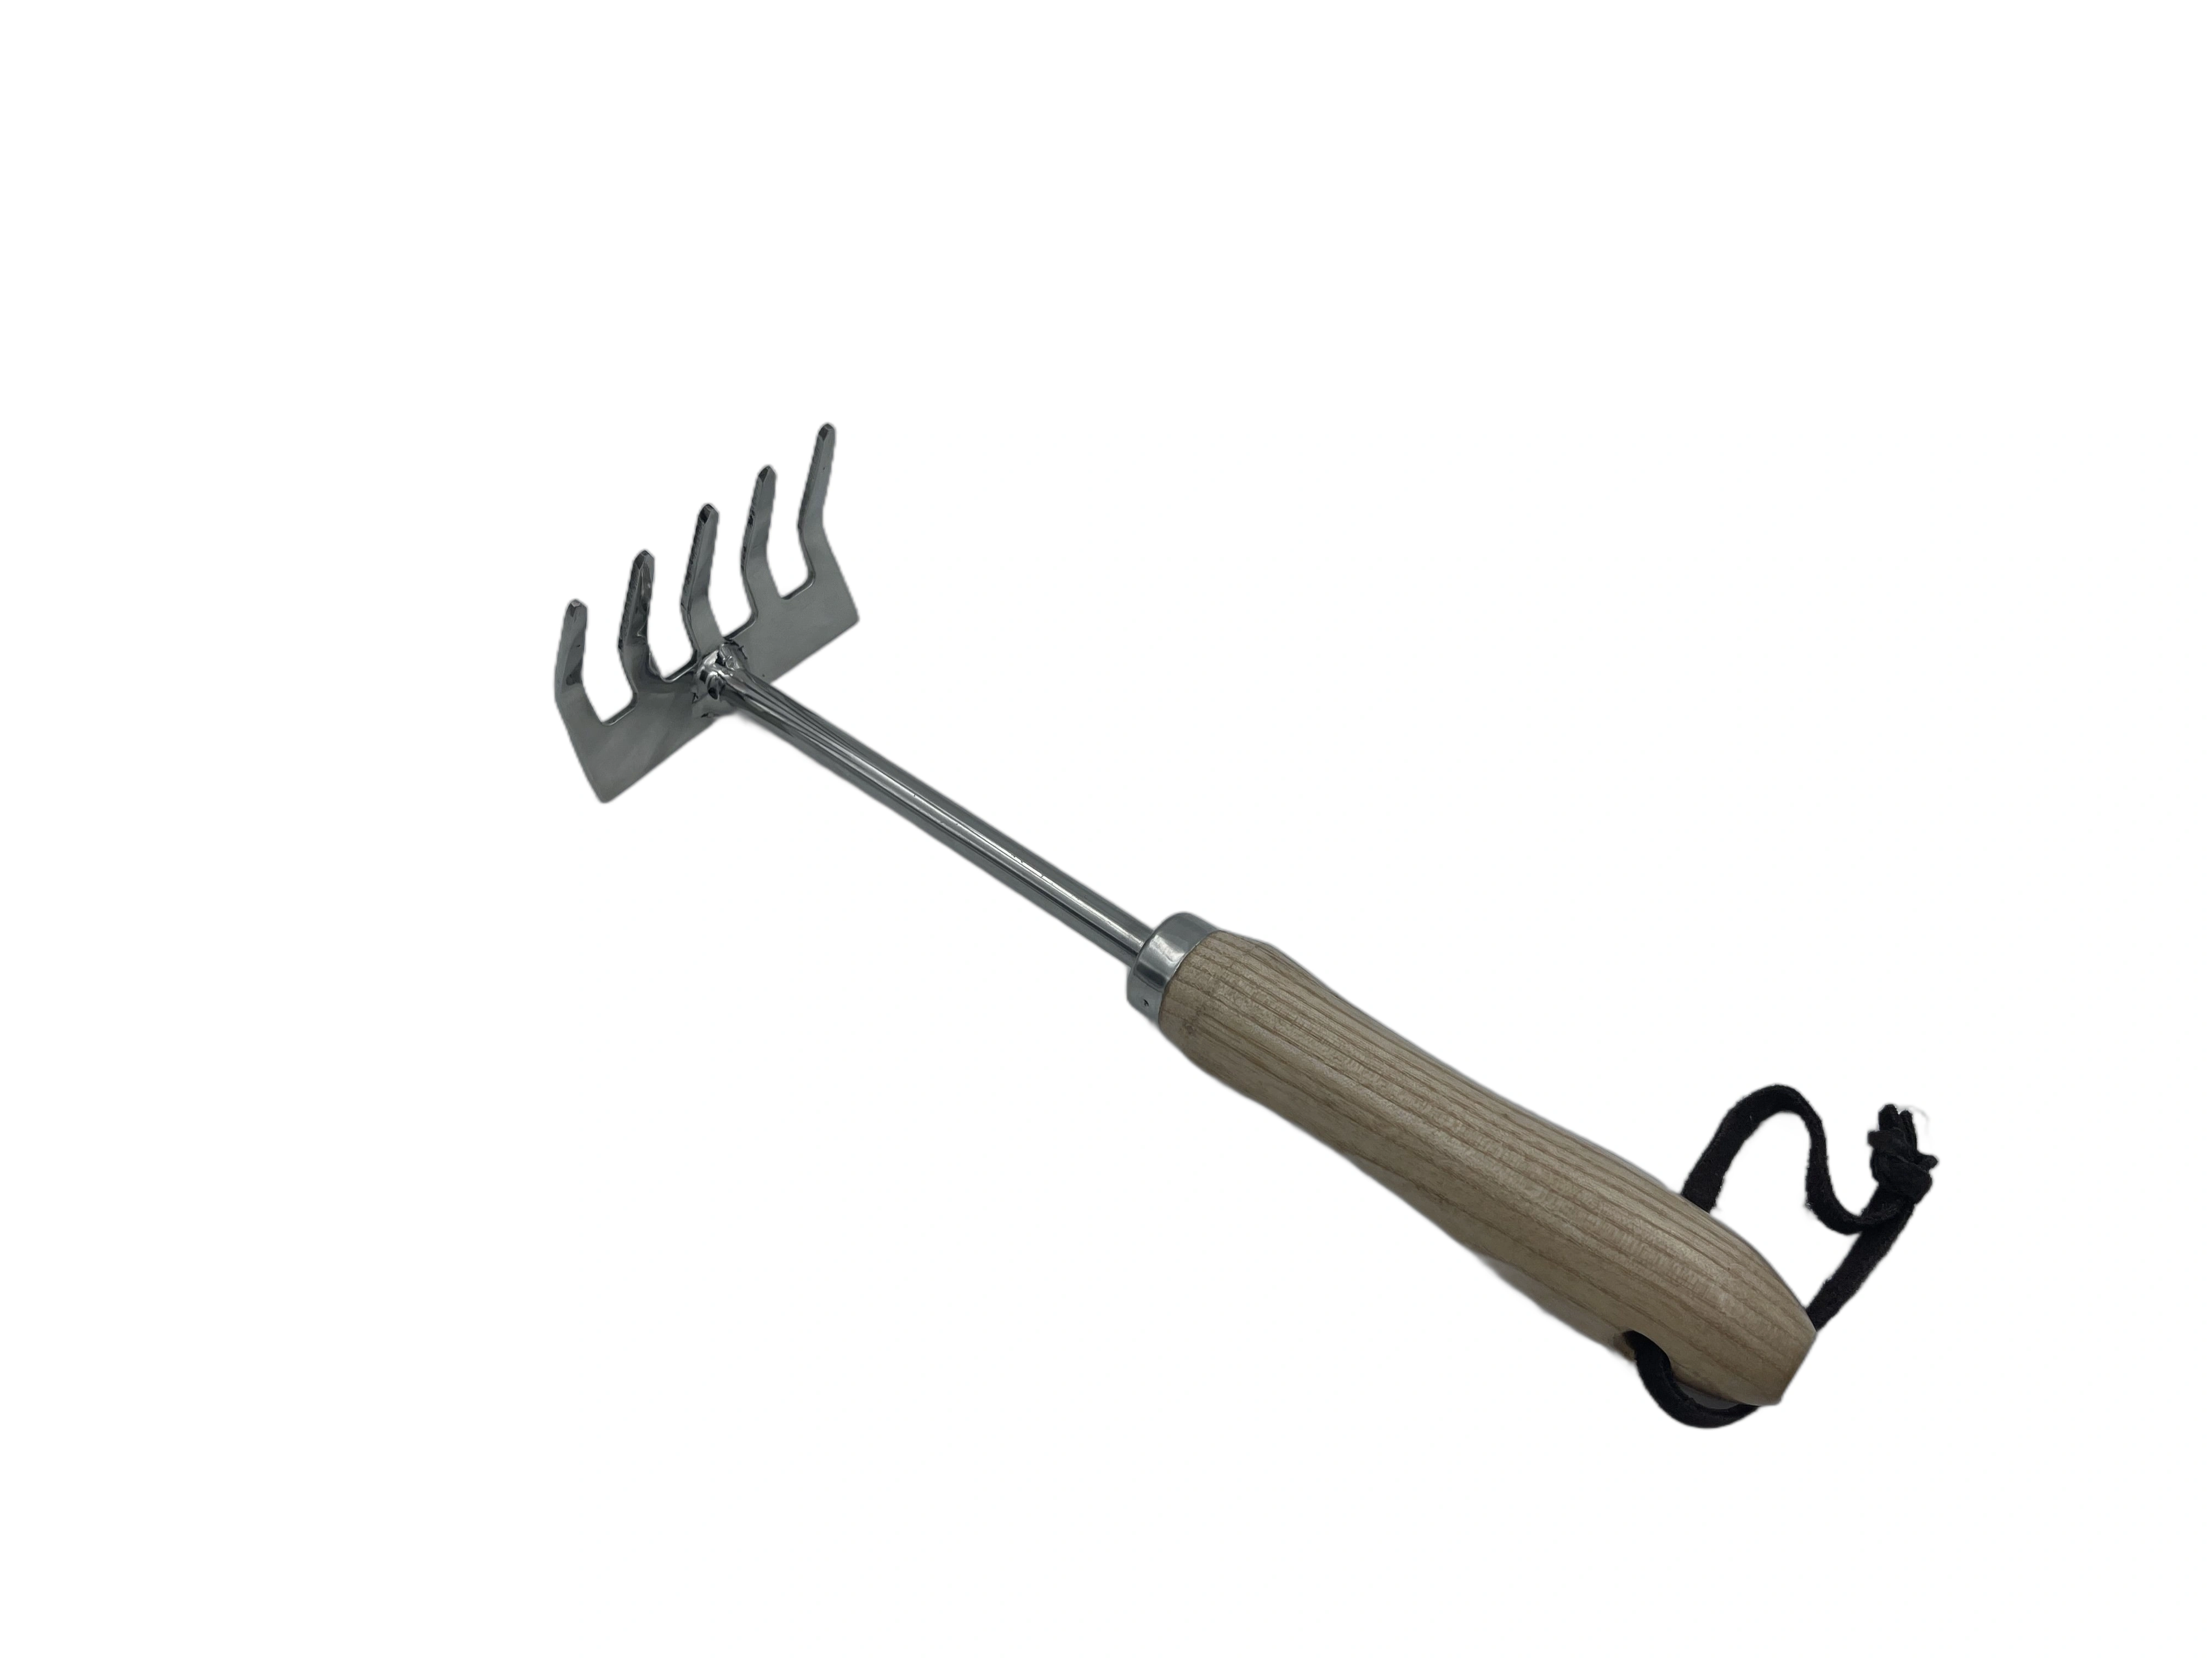 Stainless steel 5T Rake with Ash wood handle-2